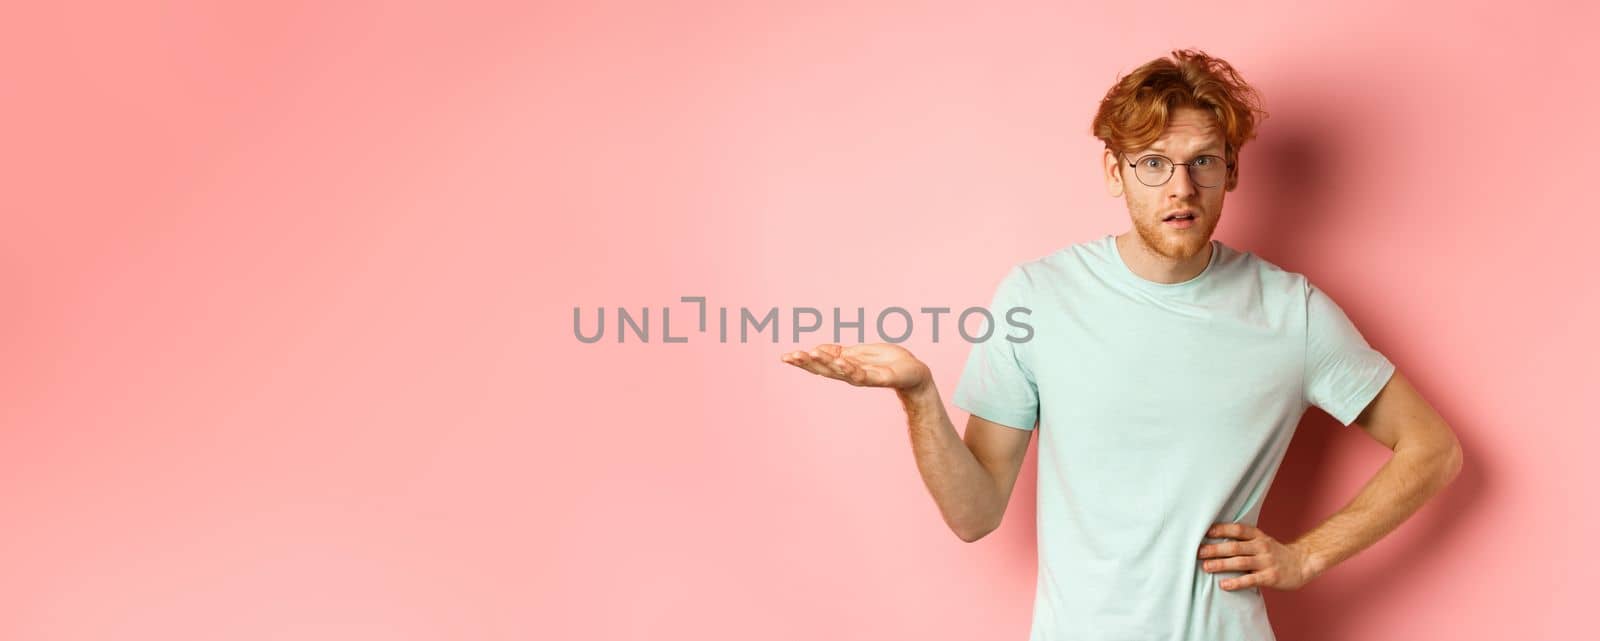 So what. Confused redhead man raising hand and shrugging, looking puzzled, dont understand something, standing over pink background.